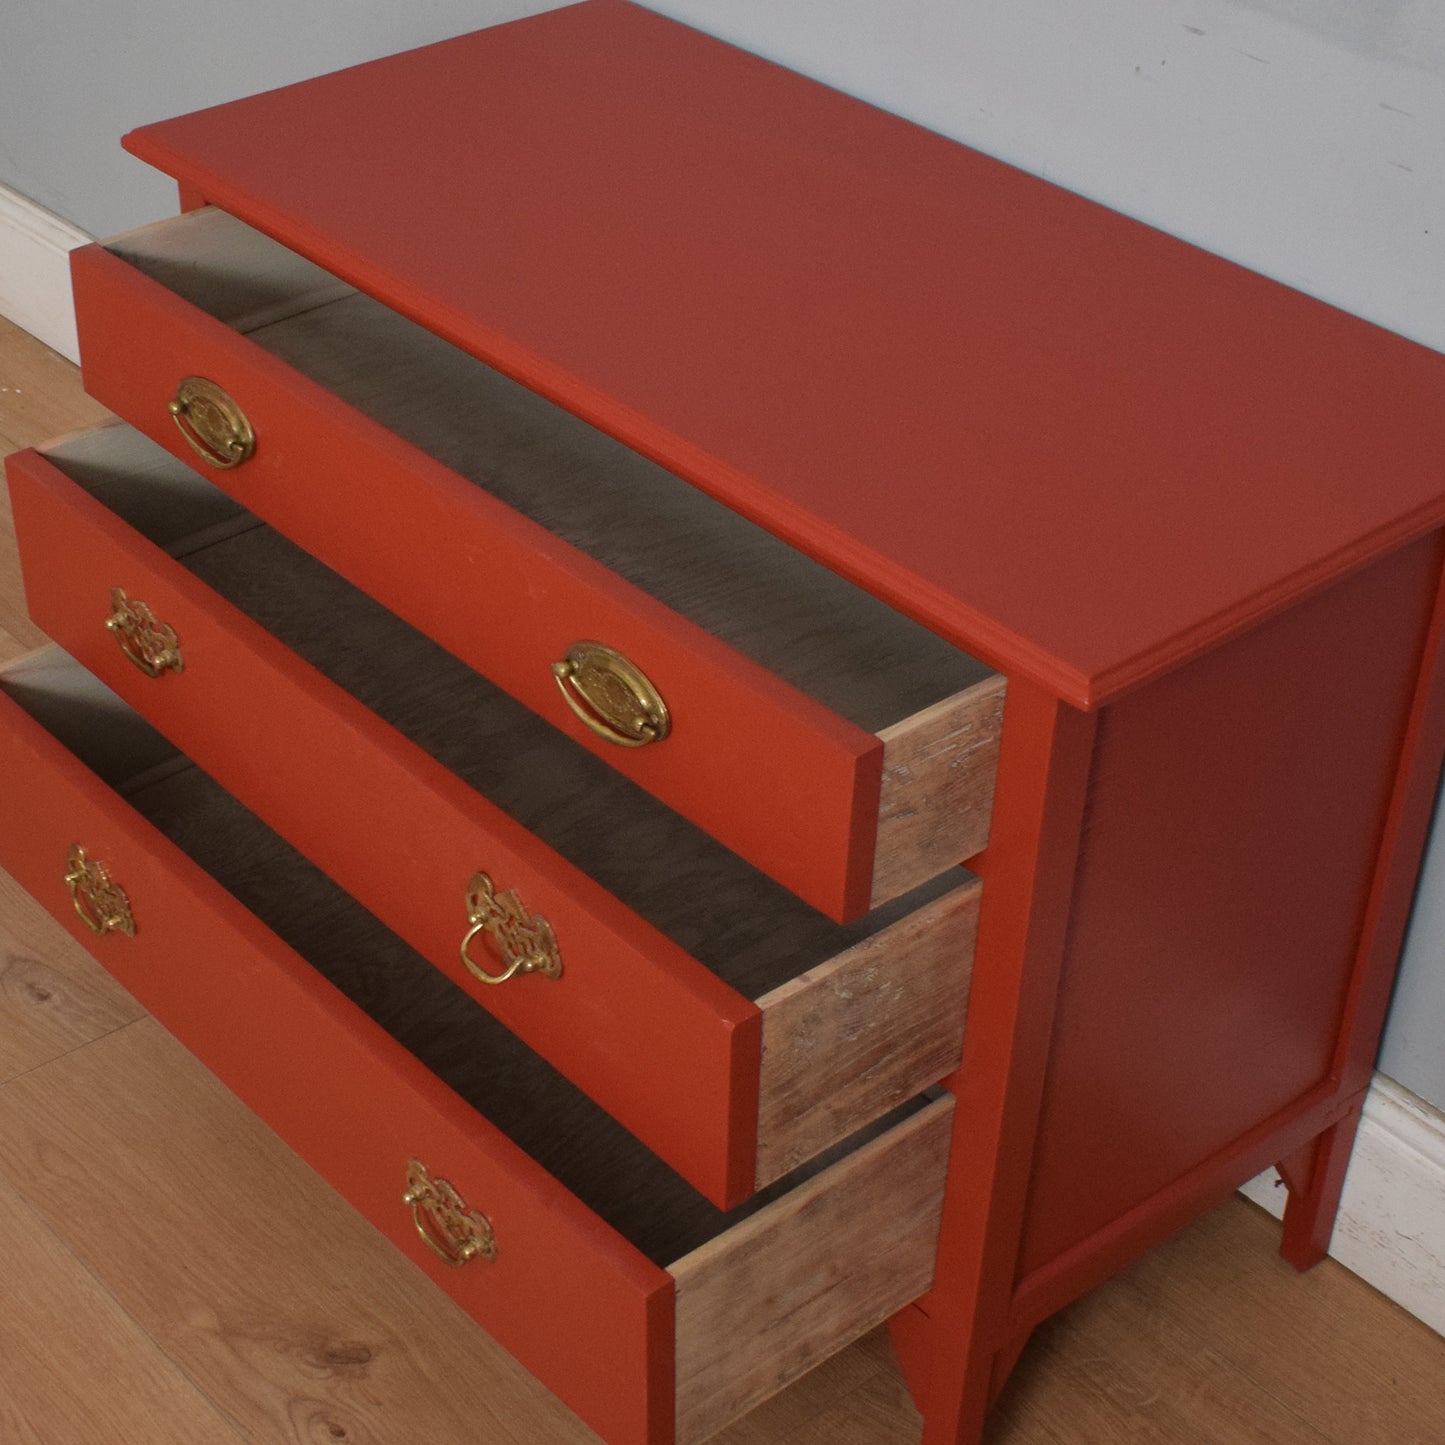 Vibrant Painted Chest of Drawers